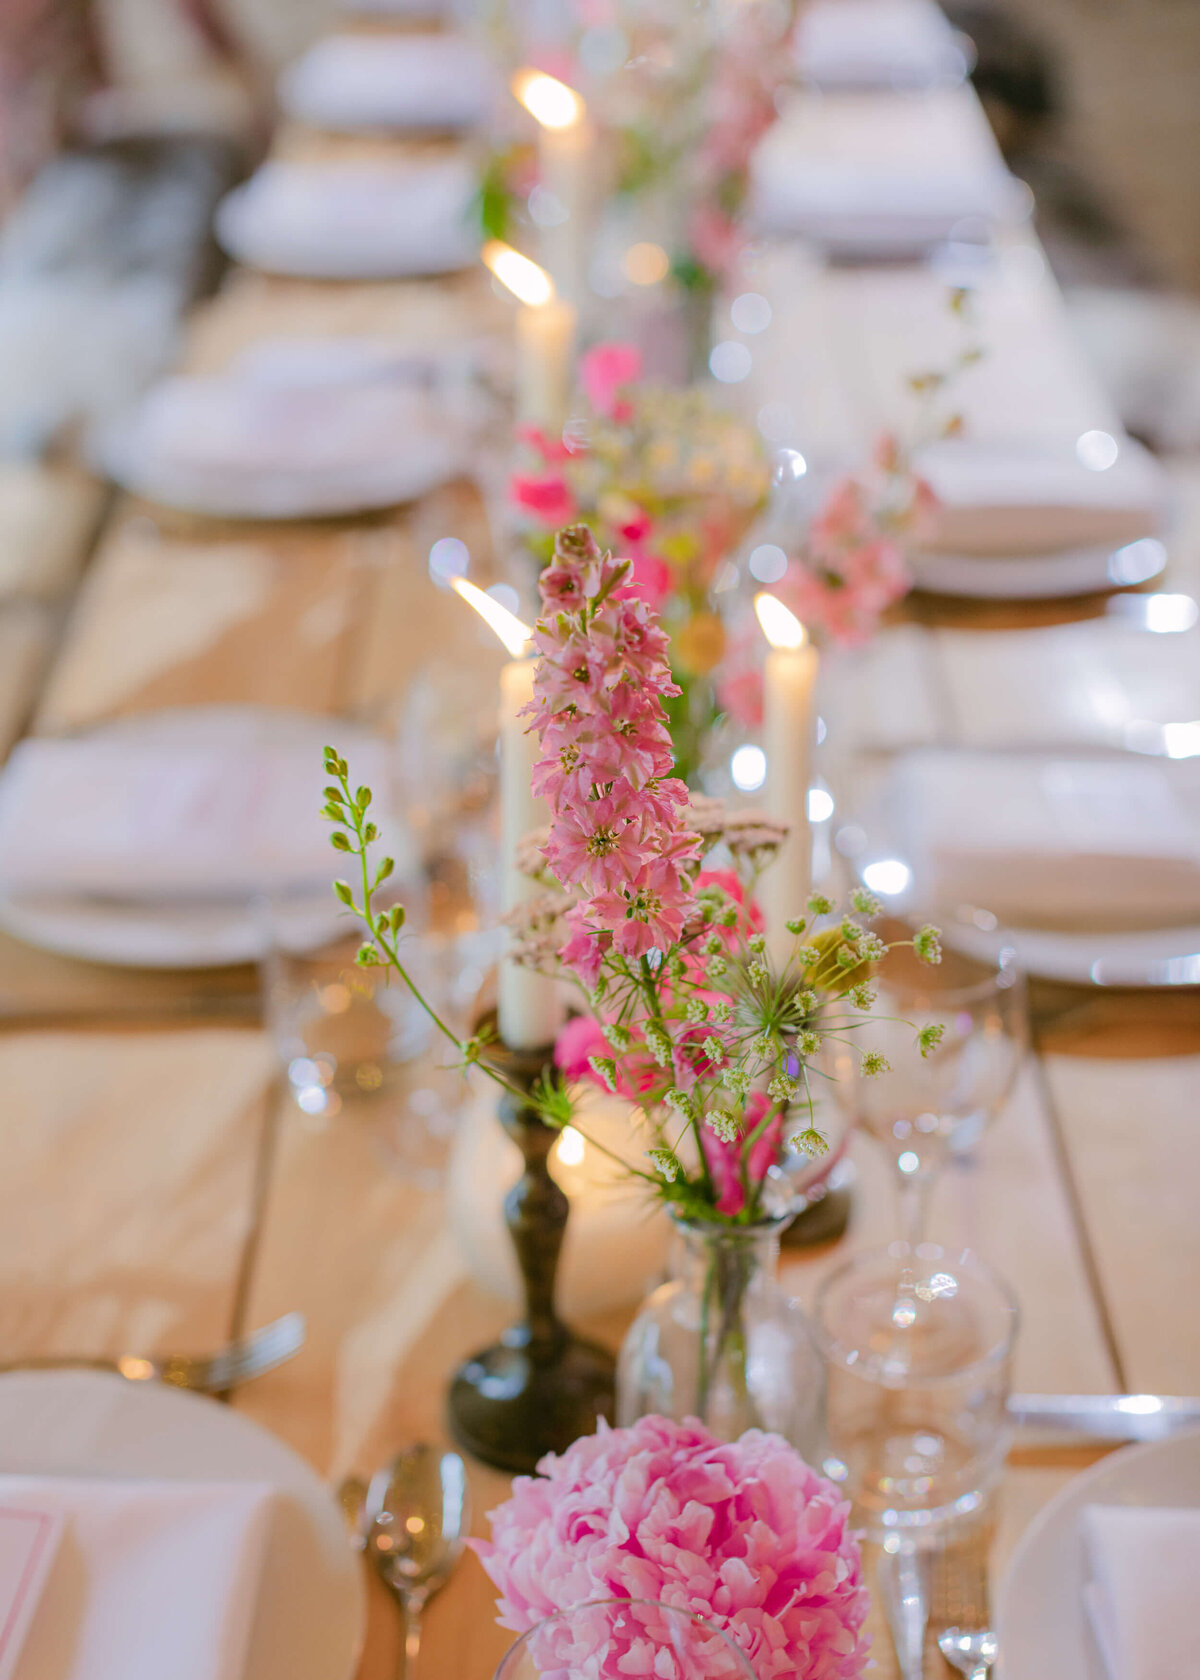 events-birthday-party-gsp-tablescape-candlestick-pink-flowers